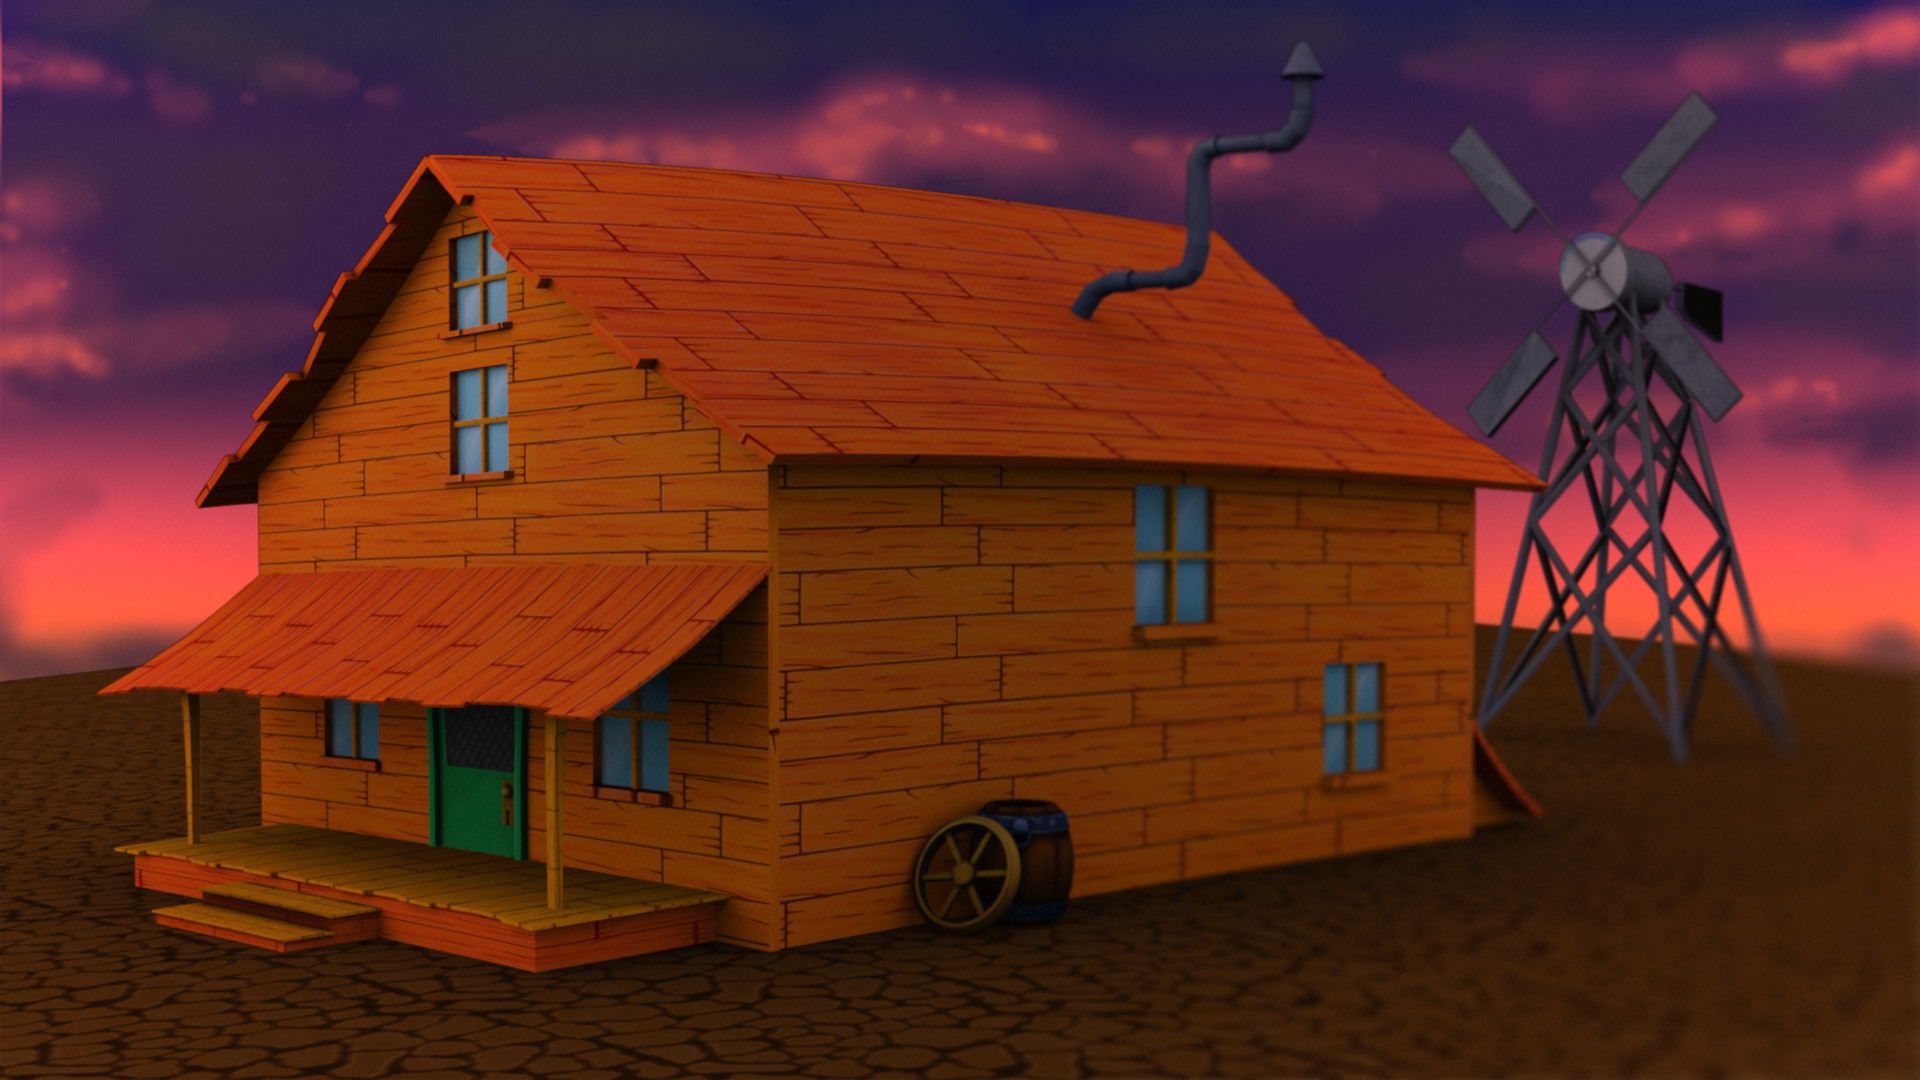 Courage The Cowardly Dog House Drawing - HD Wallpaper 